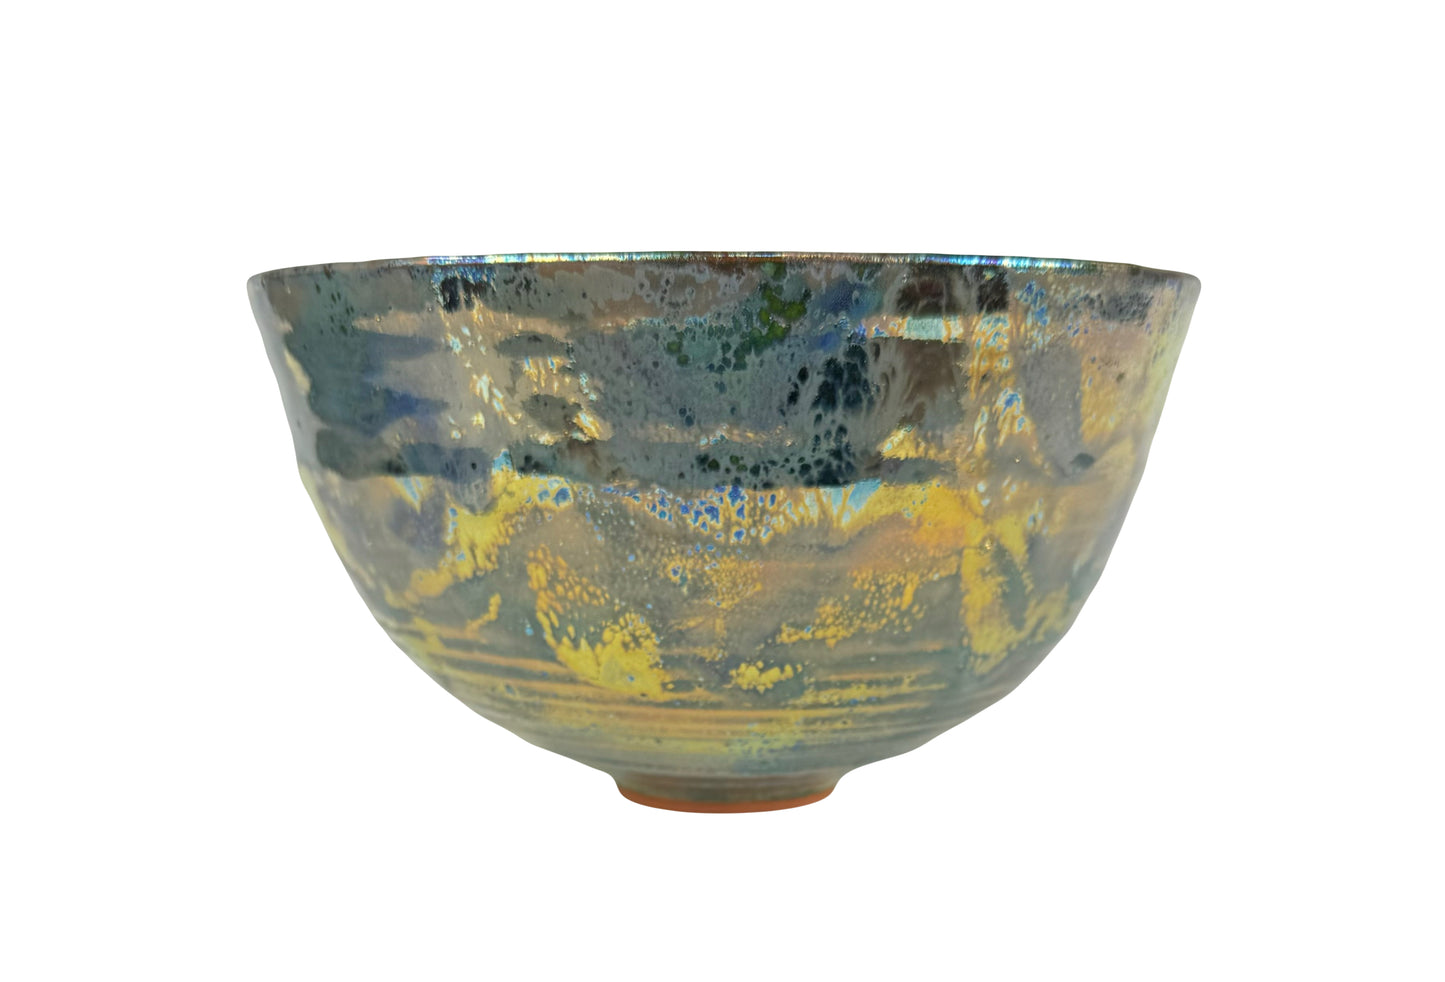 Gold and Blue Reticulated Luster Glaze Bowl